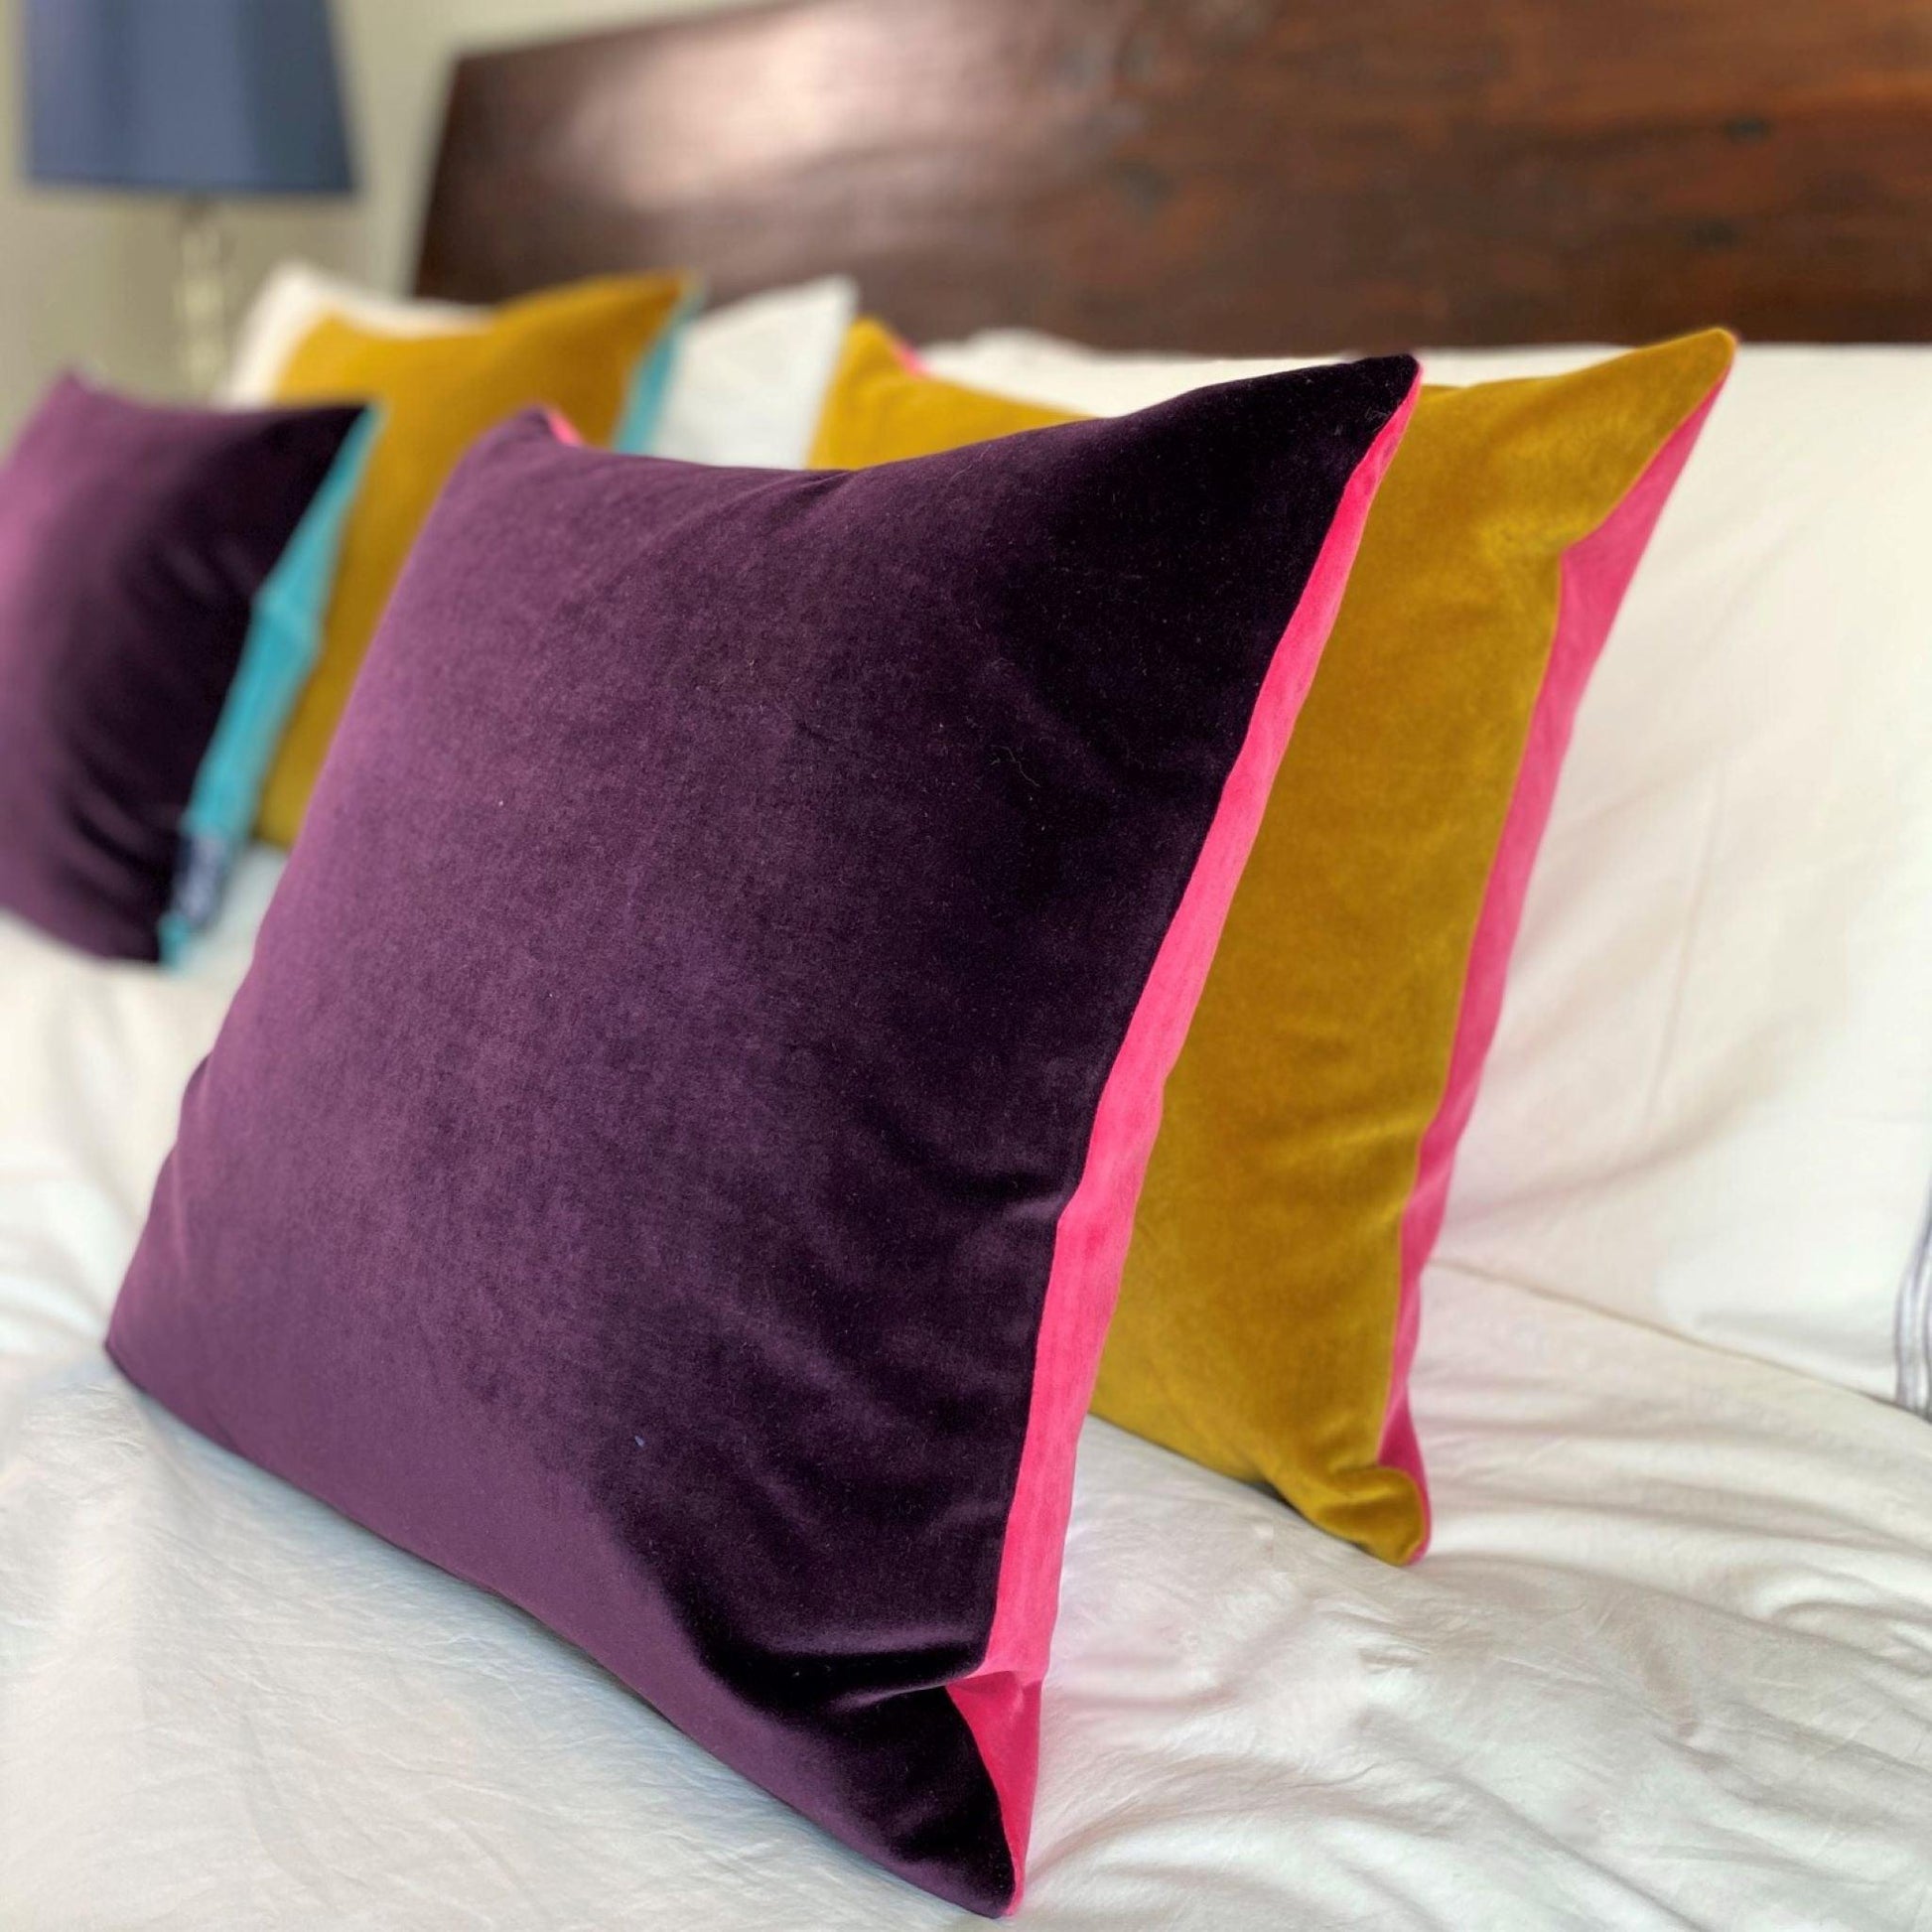 plain cushion covers in purple, pink and gold